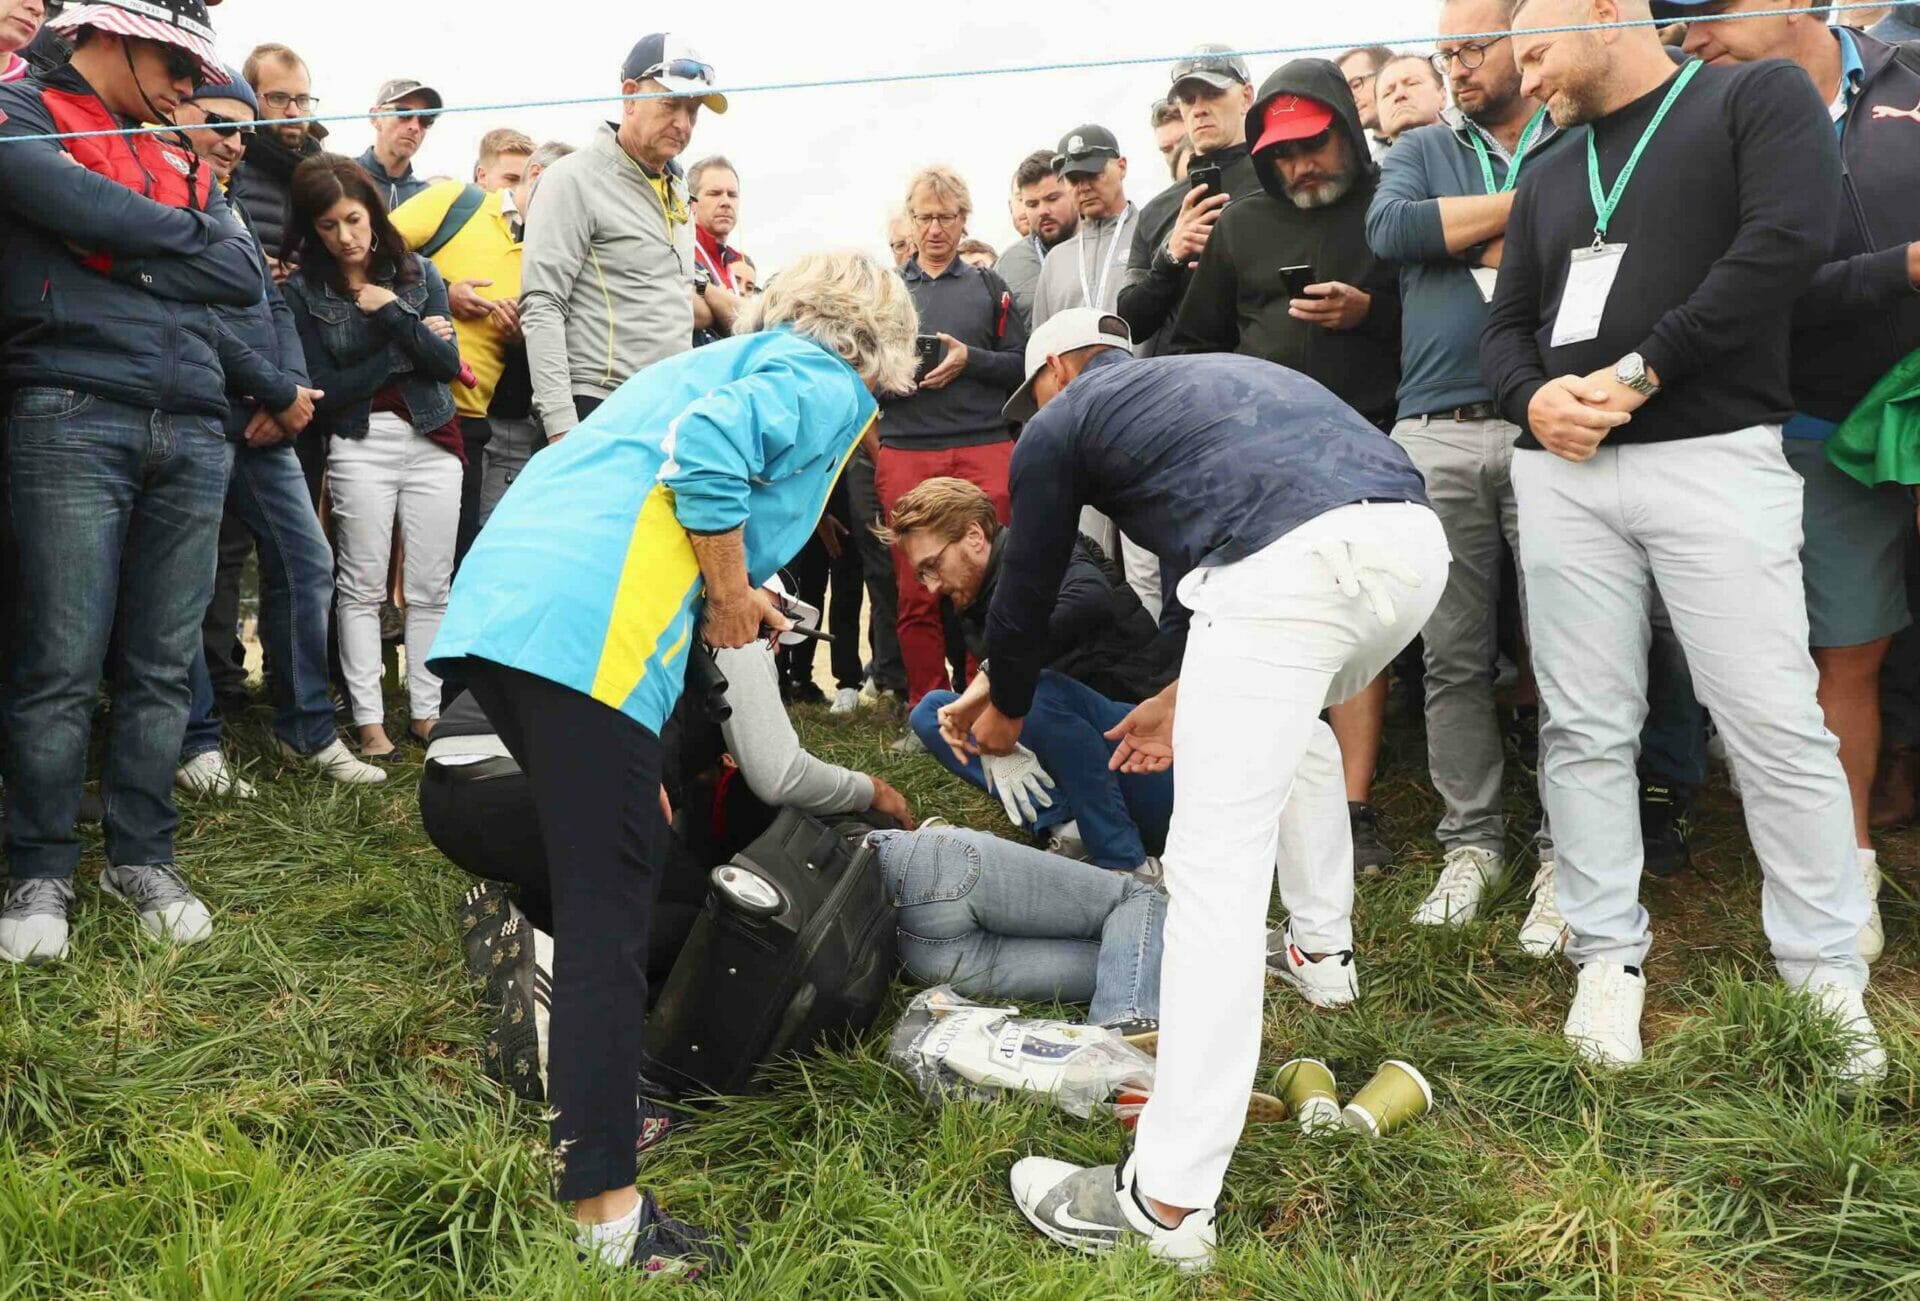 “Hey, let’s be careful out there” – a message to the Tour players 